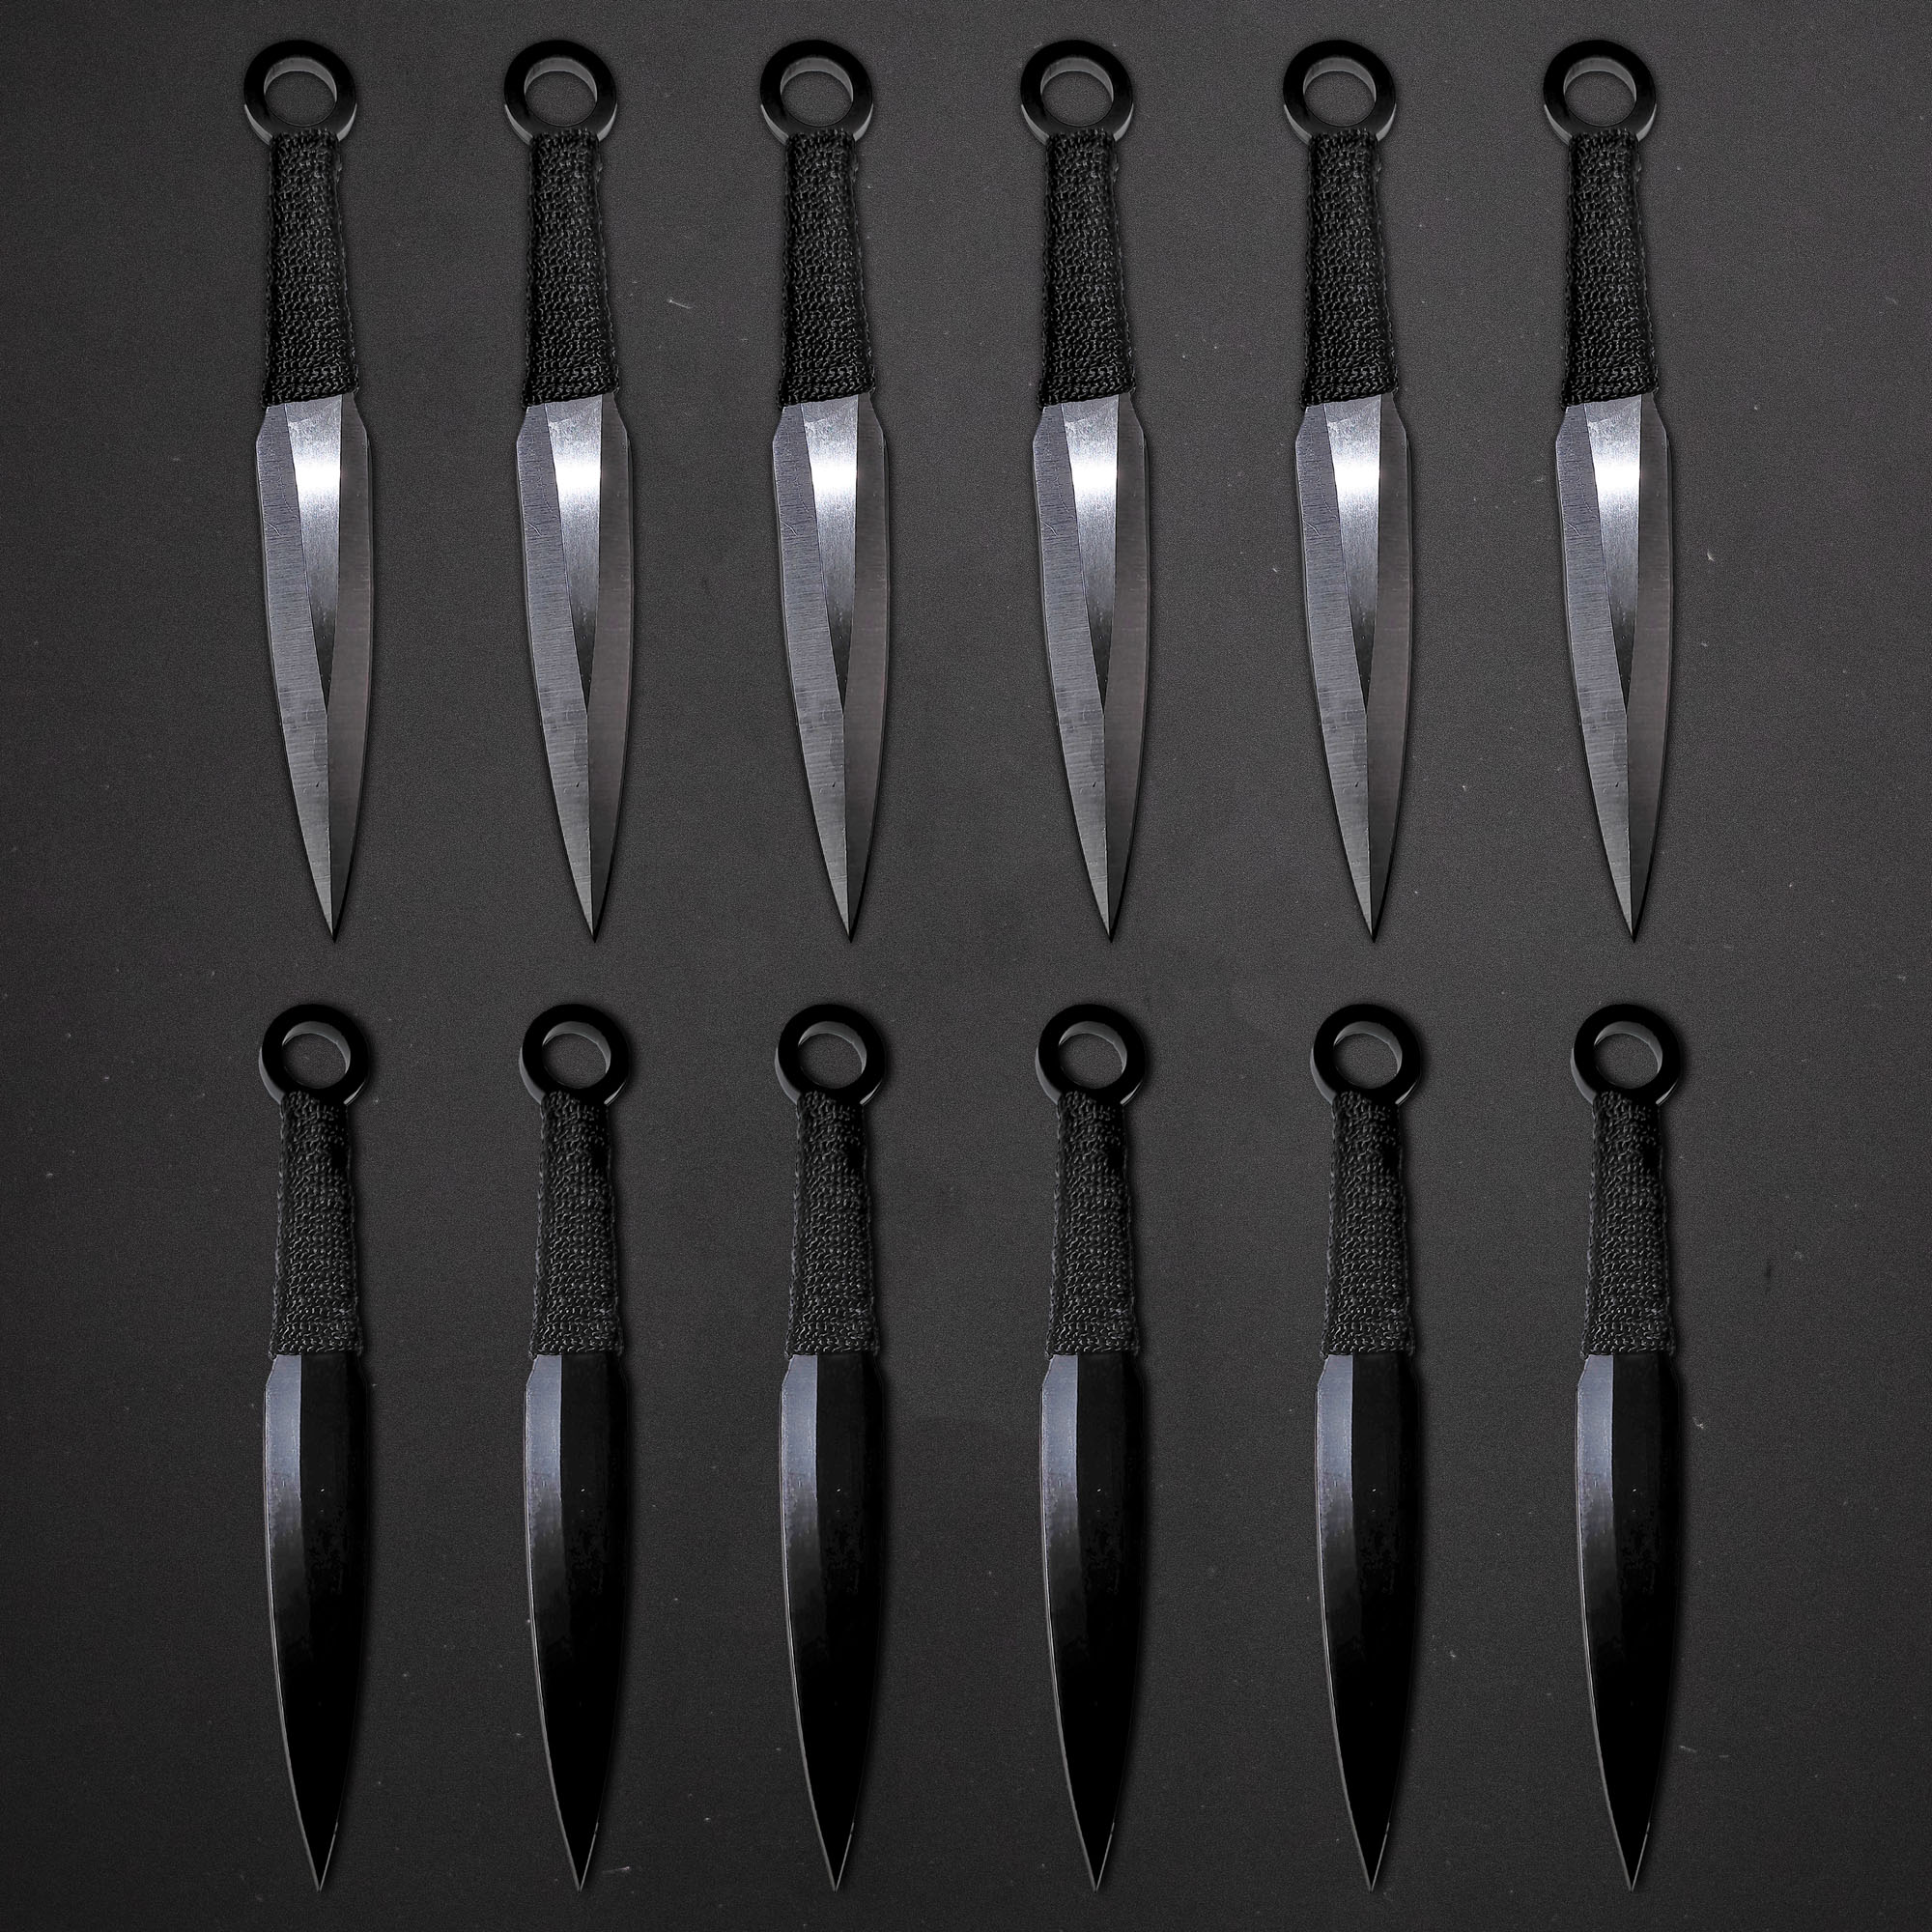 12 Black and Silver Throwing Knives with Sheath, Stainless Steel Kunai